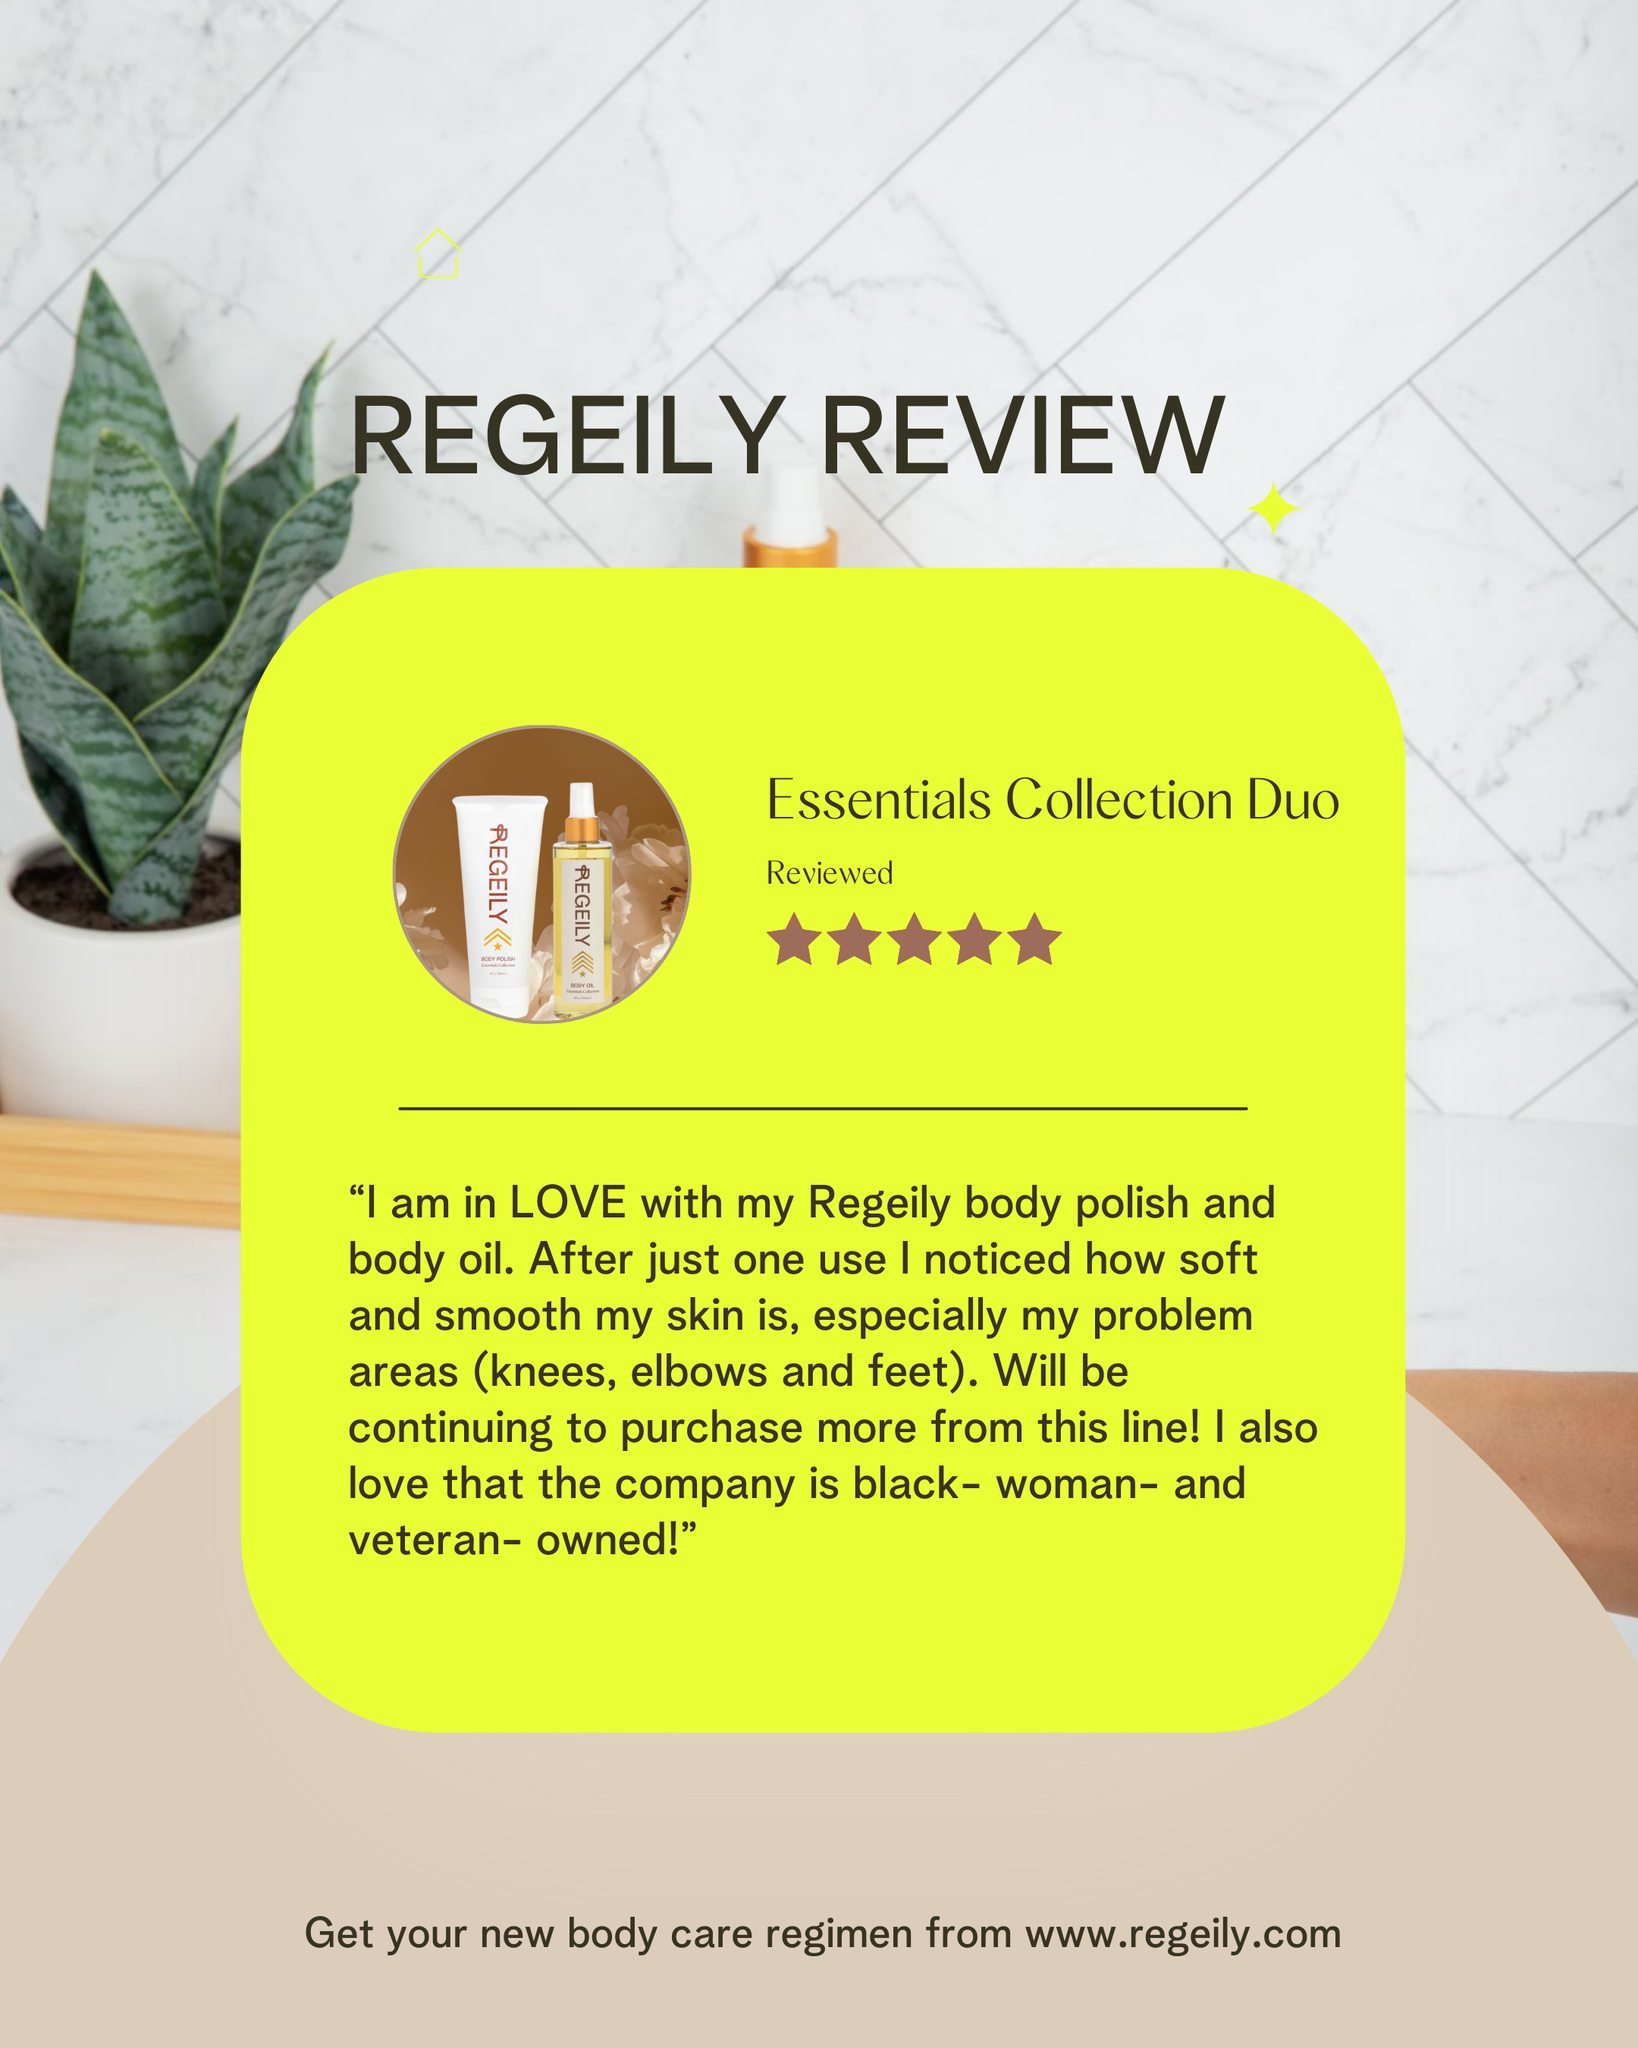 The shop is now live and the results are in! People love Regeily products and you will too.

Don't take our word for it - see what Erica had to say.

&ldquo;I am in LOVE with my Regeily body polish and body oil. After just one use I noticed how soft 